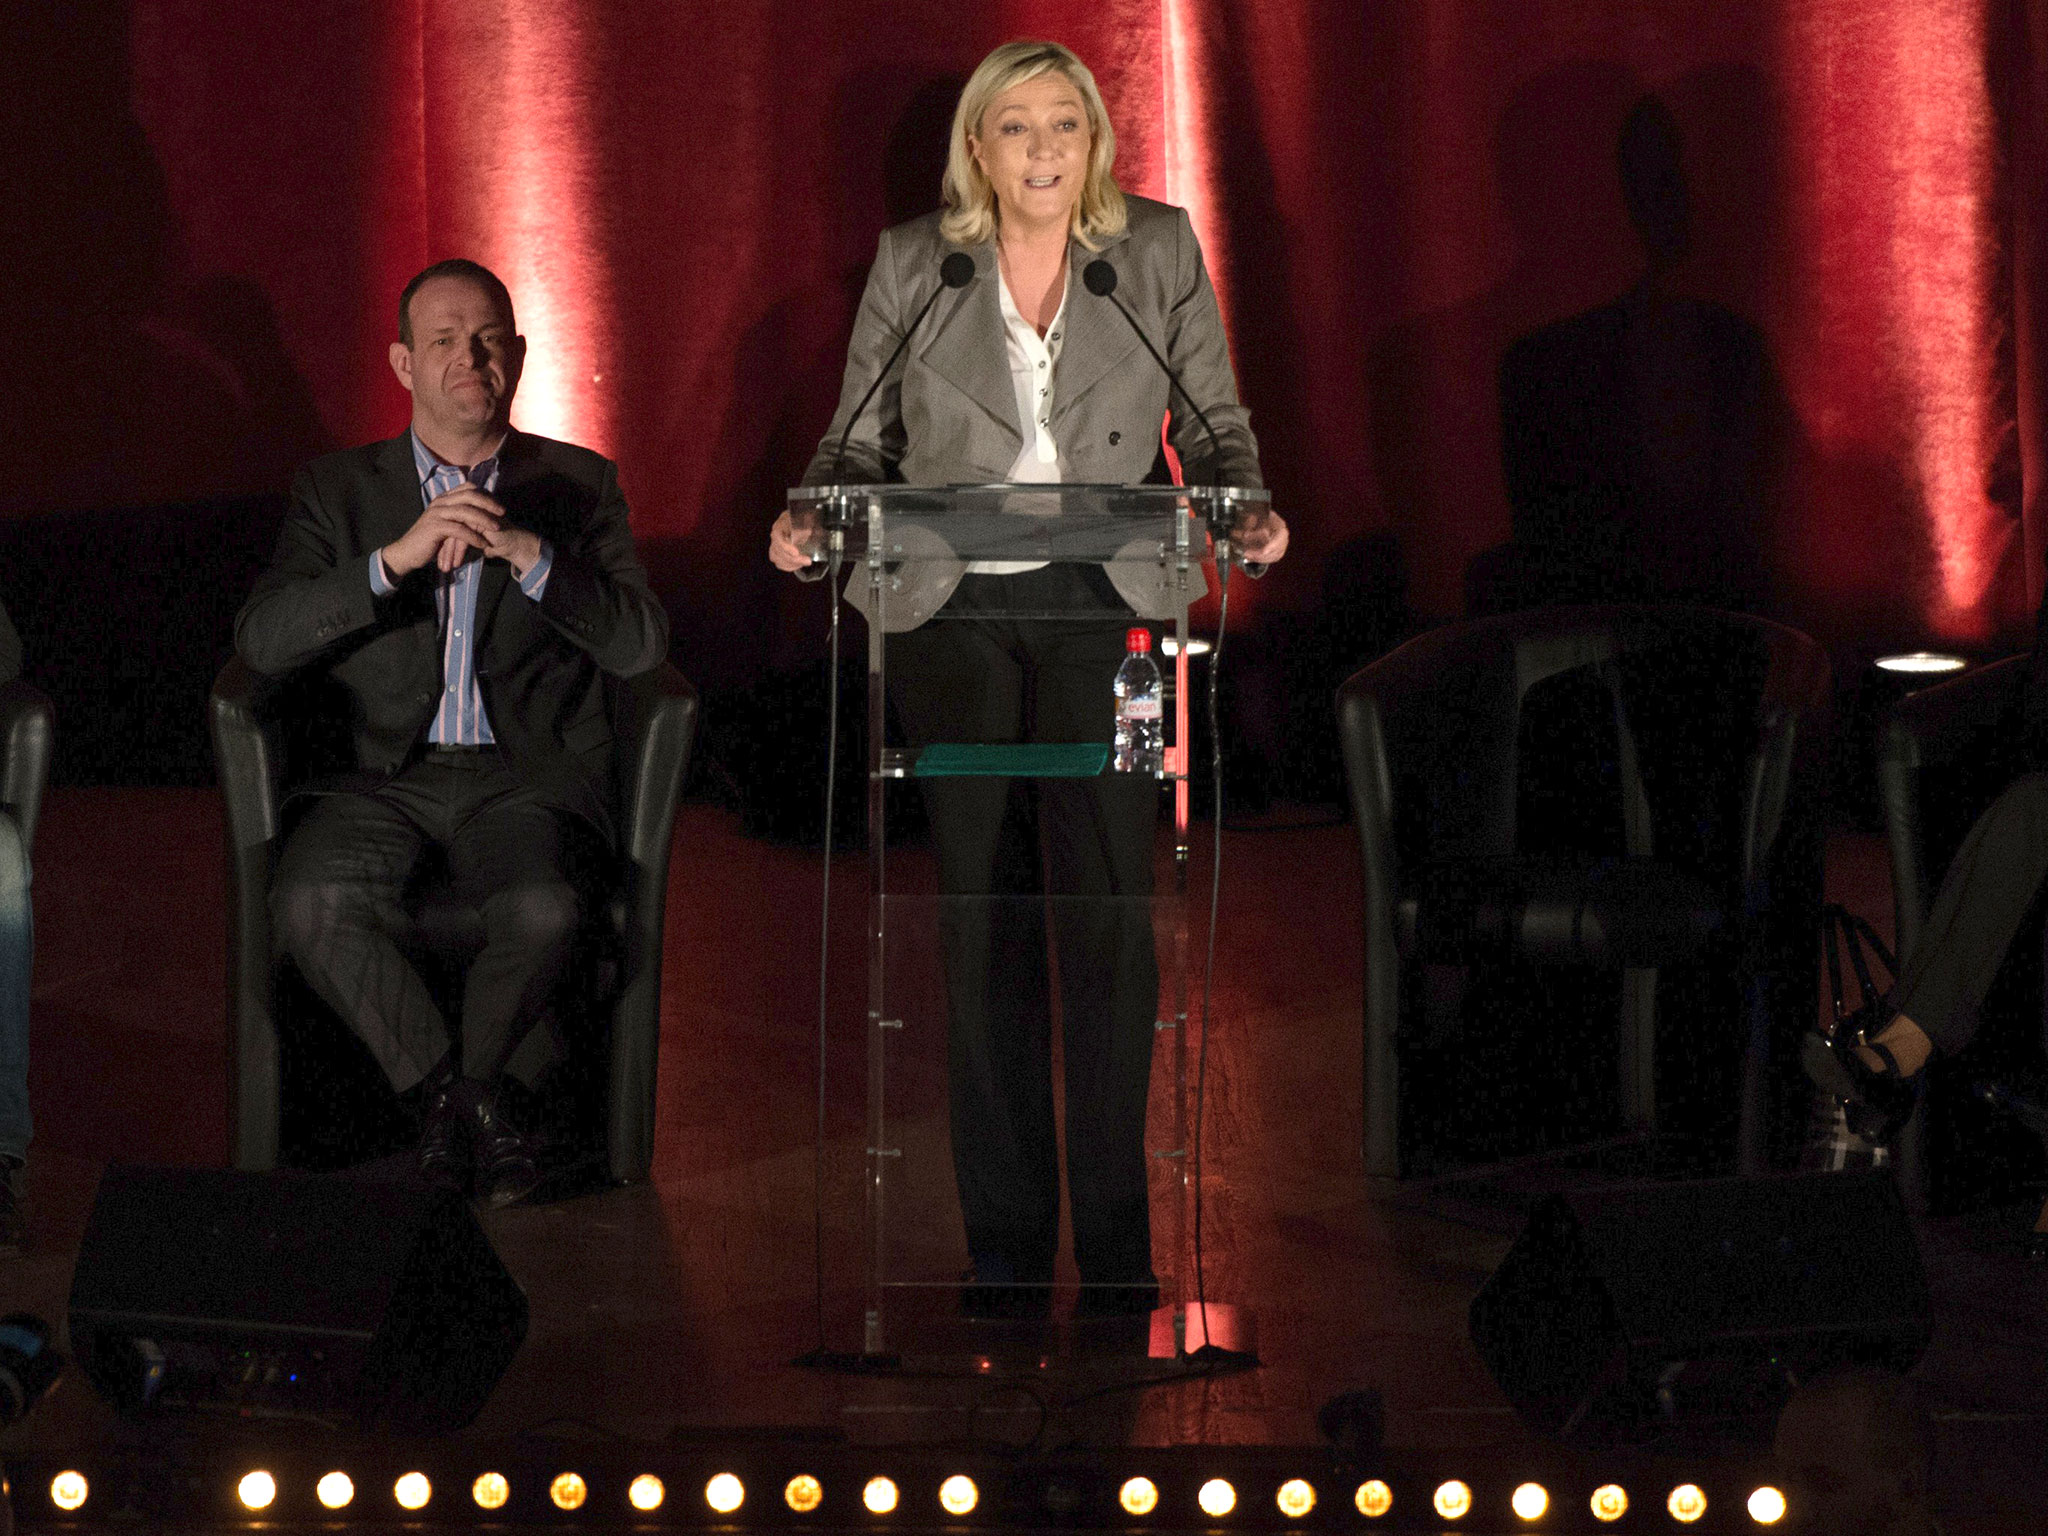 The head of France’s far-right National Front party Marine Le Pen delivers a speech ahead of the second round of local elections on March 25, 2015.
